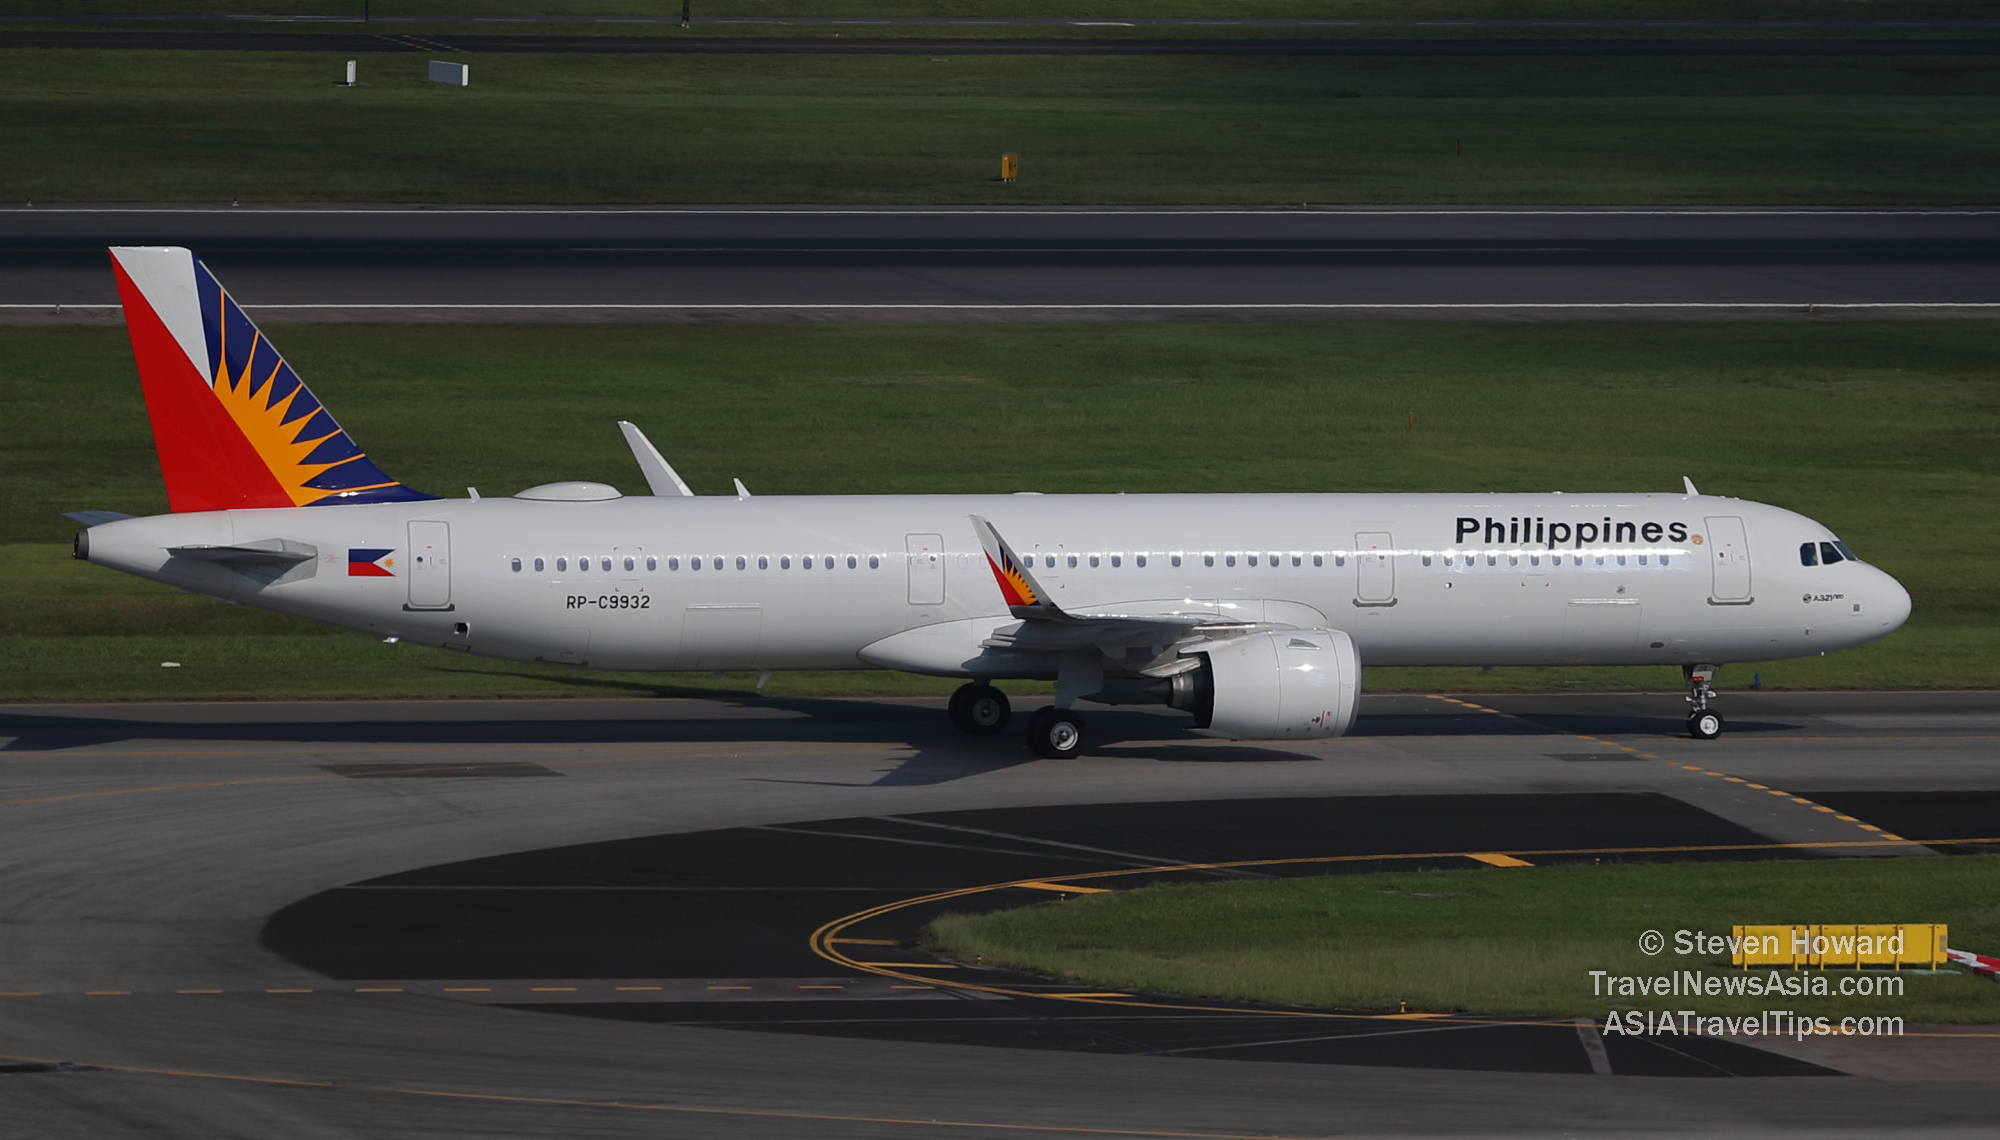 Philippine Airlines Airbus A321 reg: RP-C9932. Picture by Steven Howard of TravelNewsAsia.com Click to enlarge.